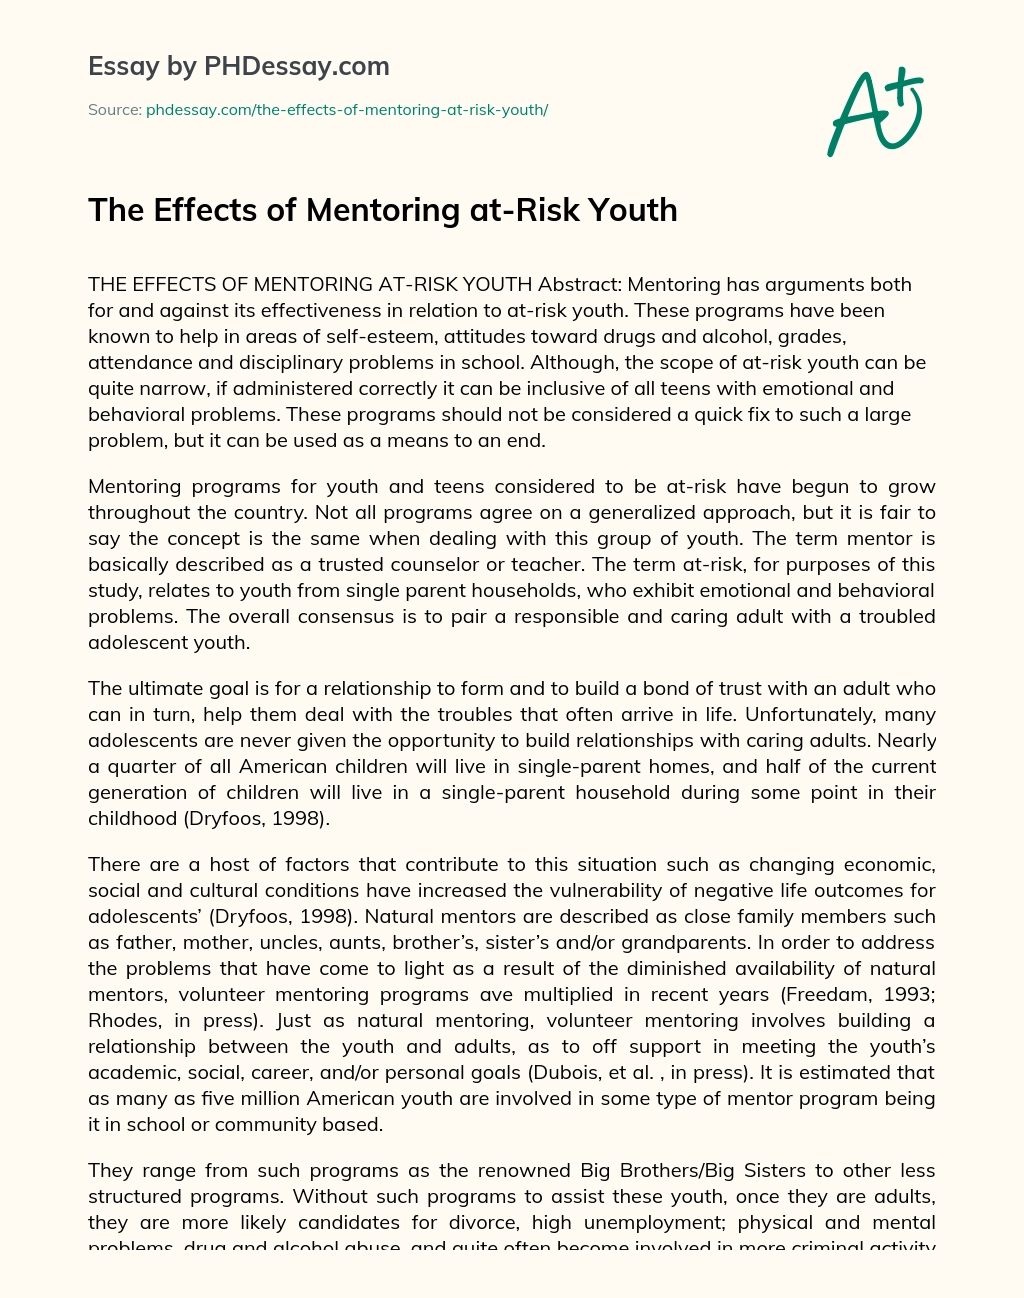 The Effects of Mentoring at-Risk Youth essay